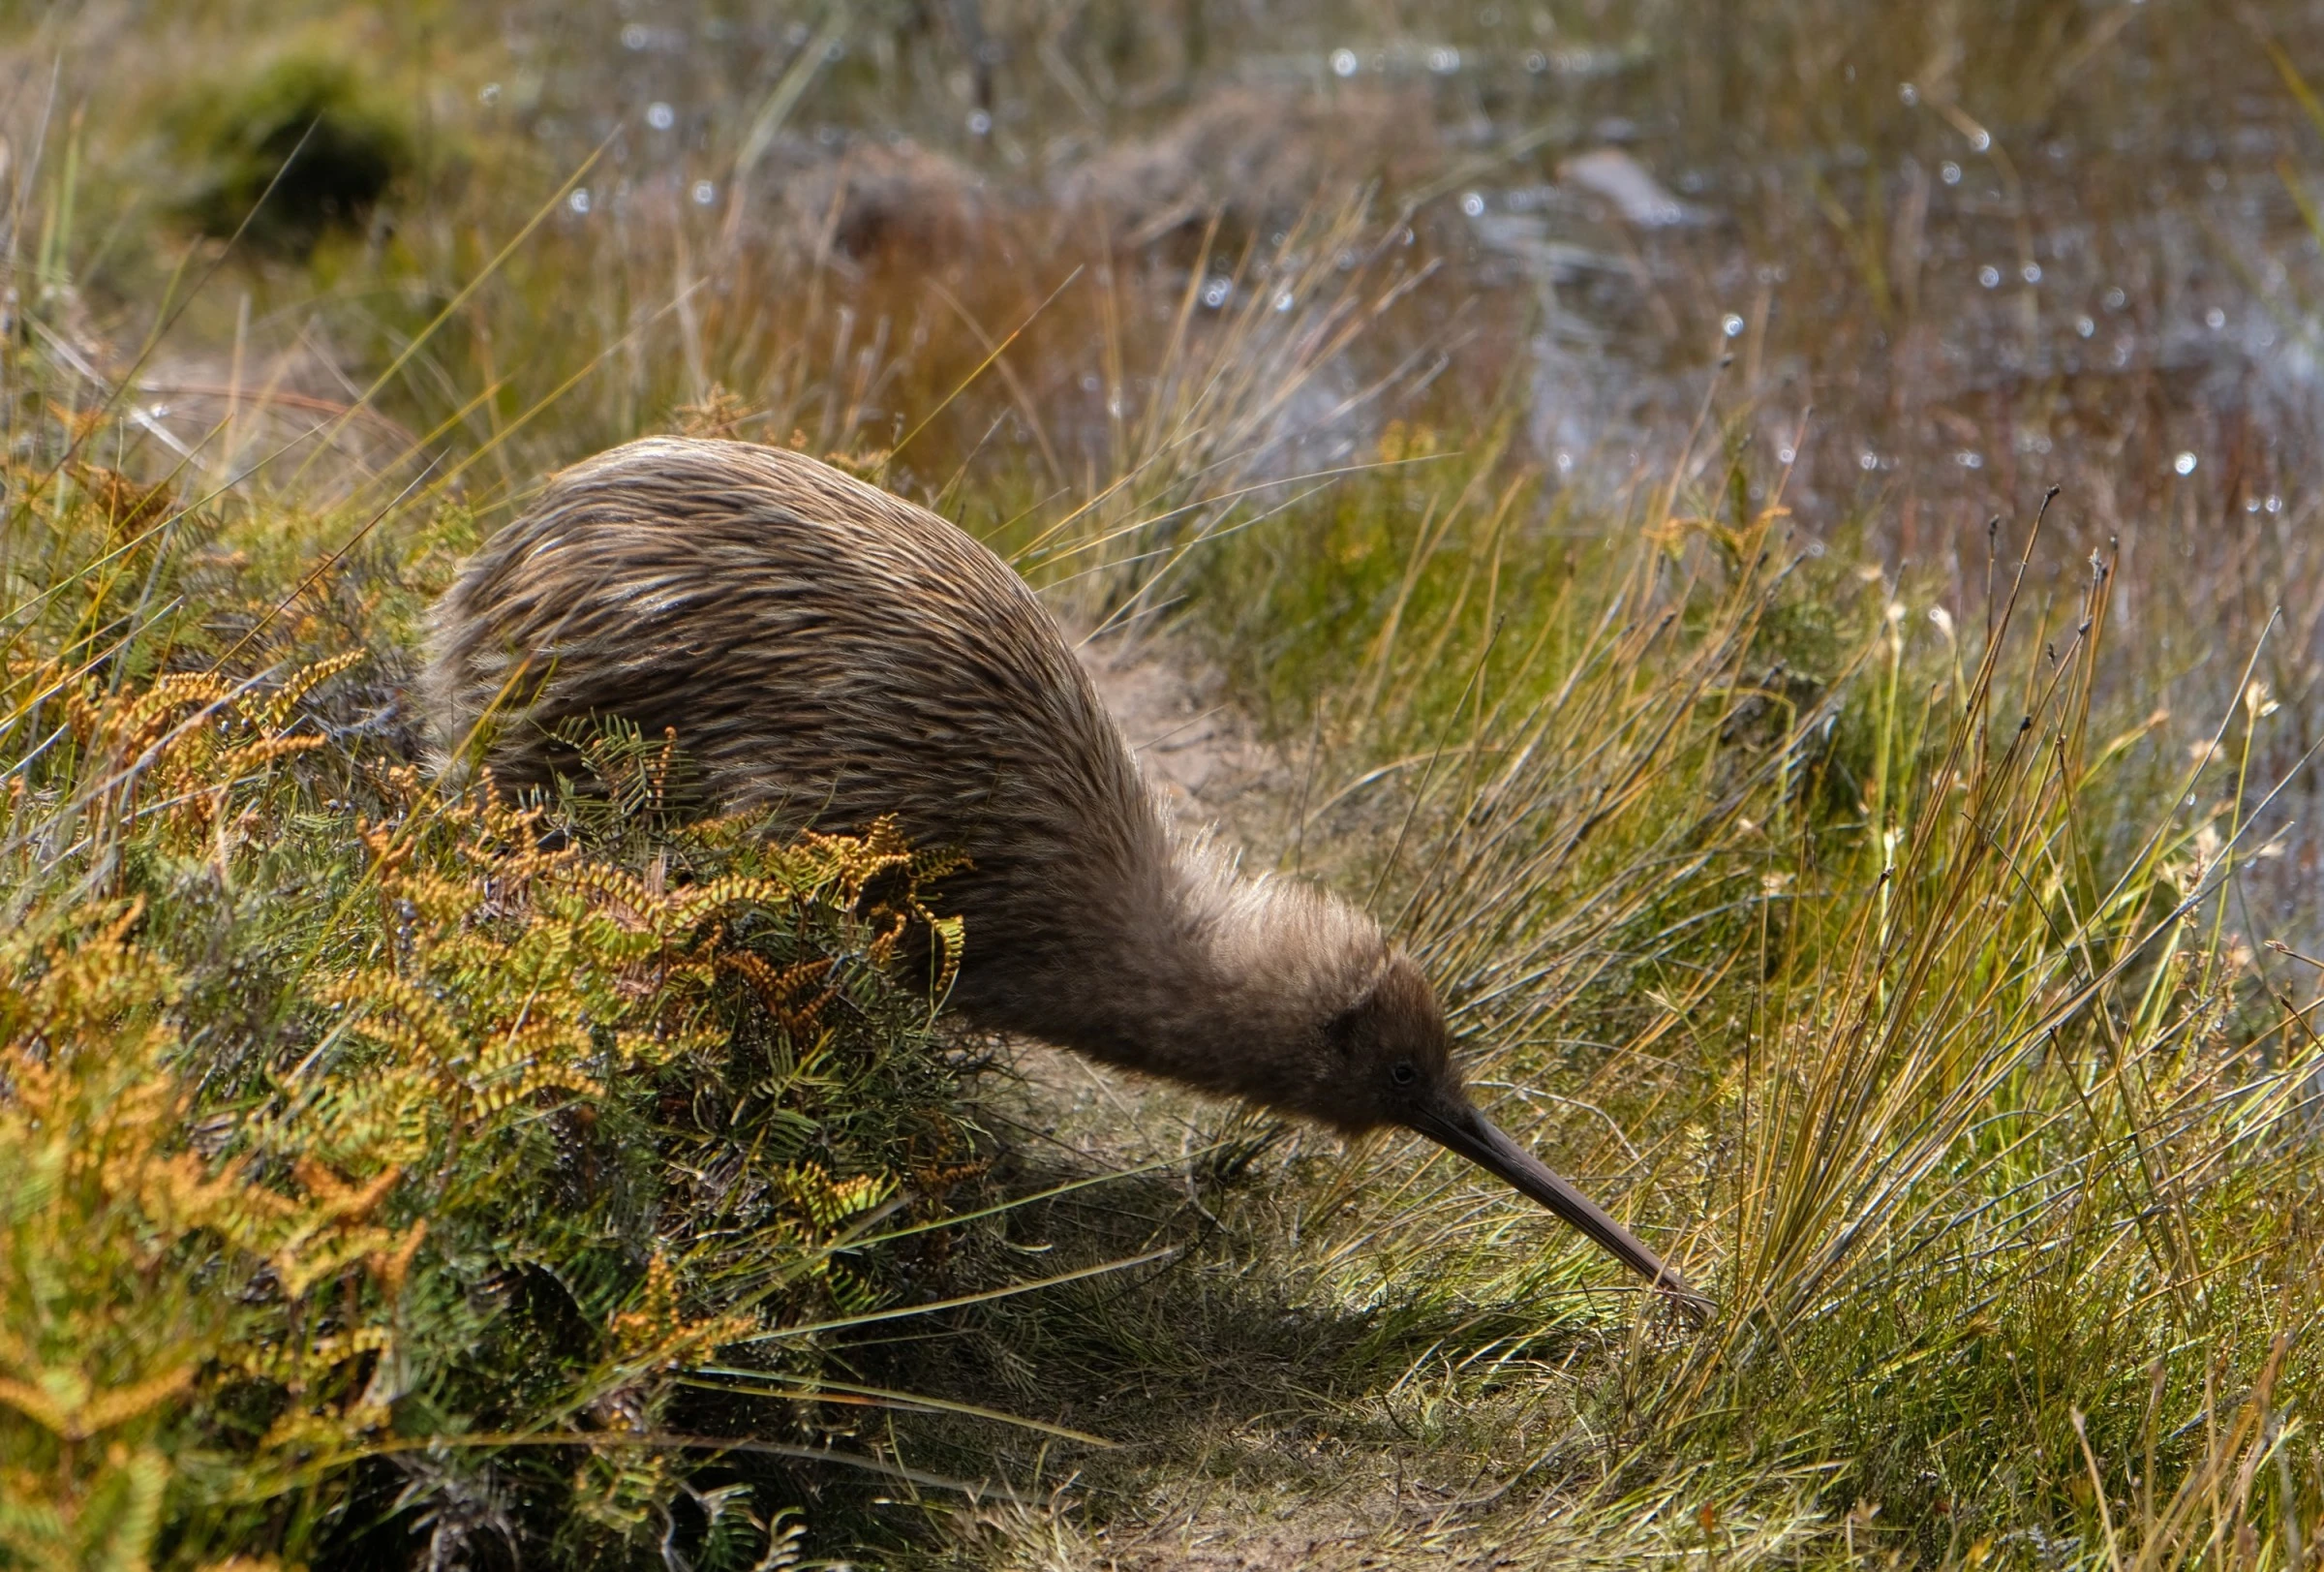 New Zealand wildlife: Where to see iconic animals in New Zealand